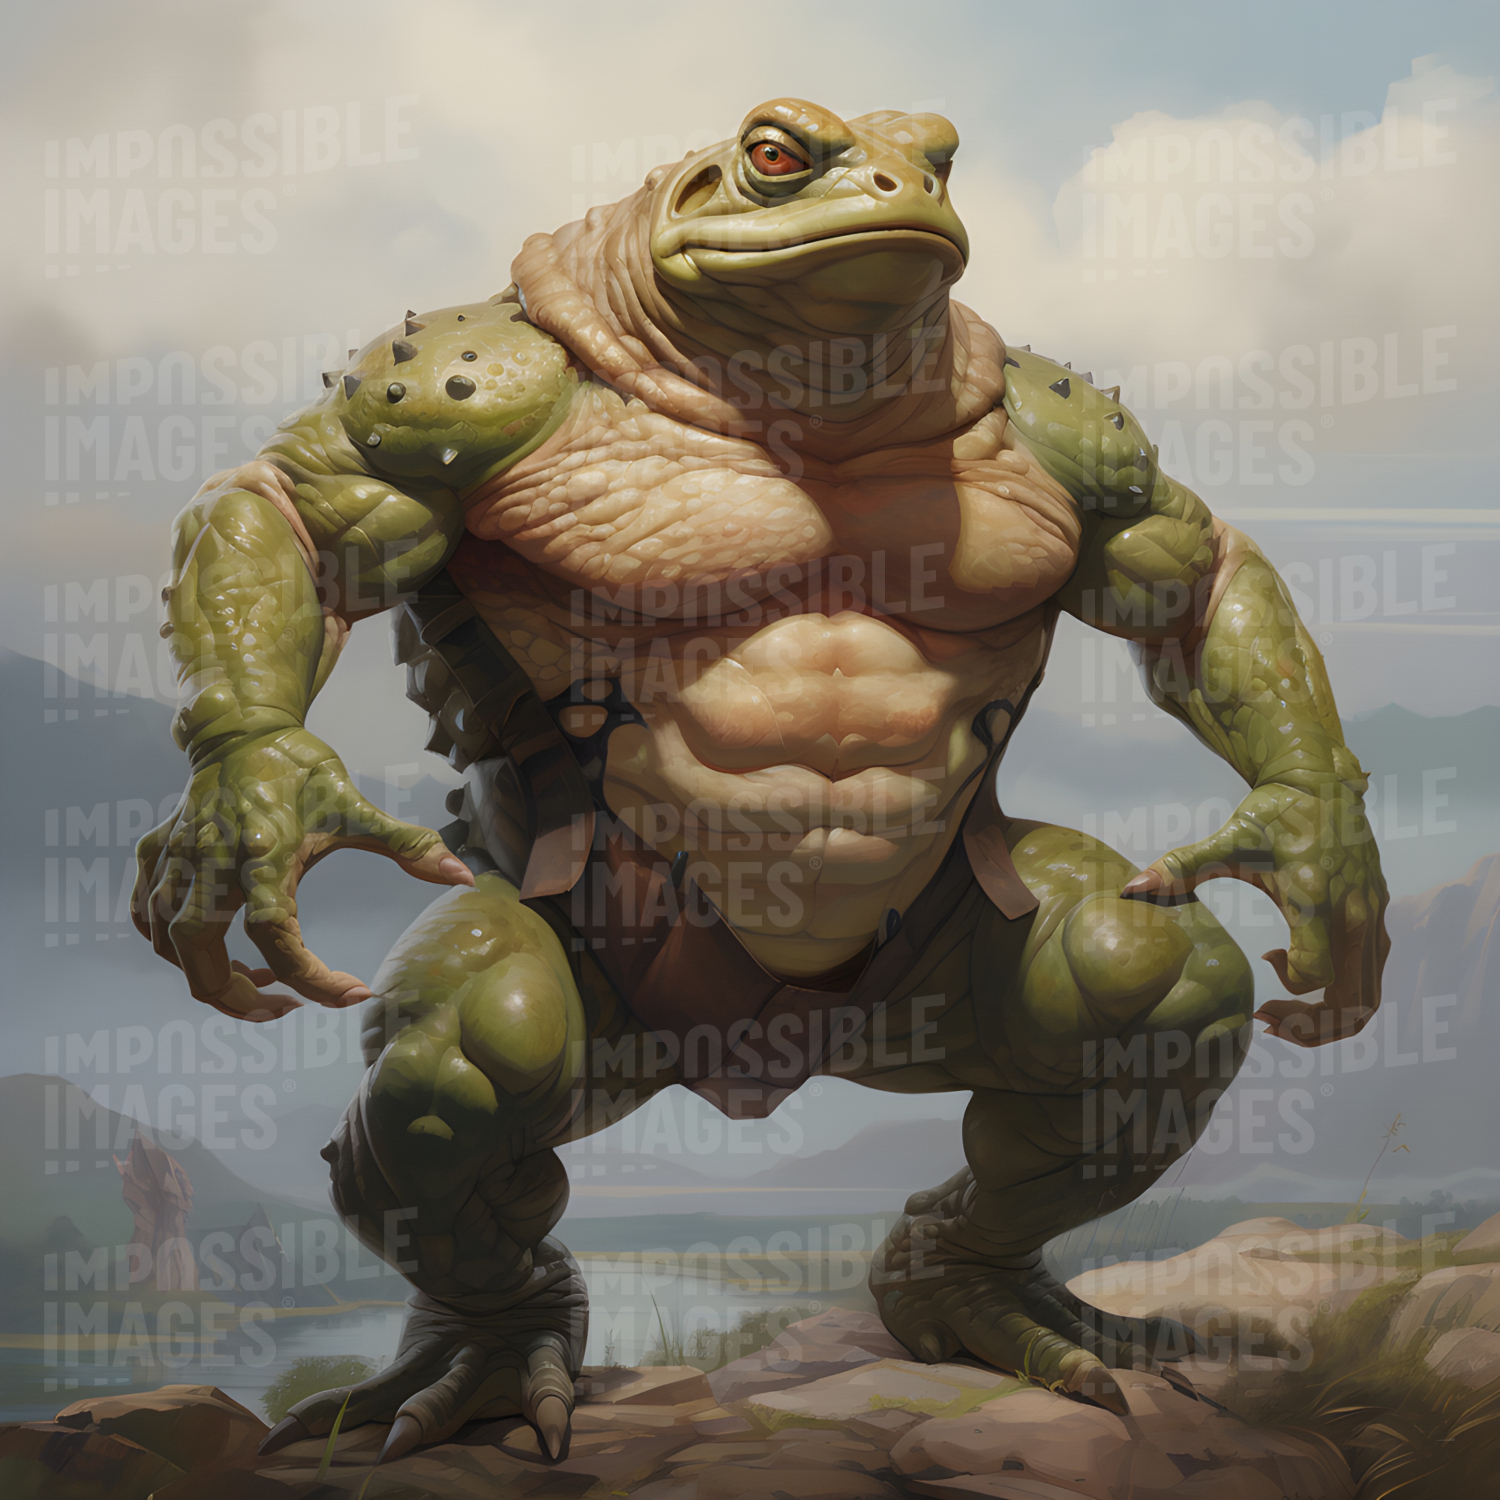 Extremely muscular frog -  An extremely muscular frog, with bulging biceps and a powerful physique, capable of leaping great distances.